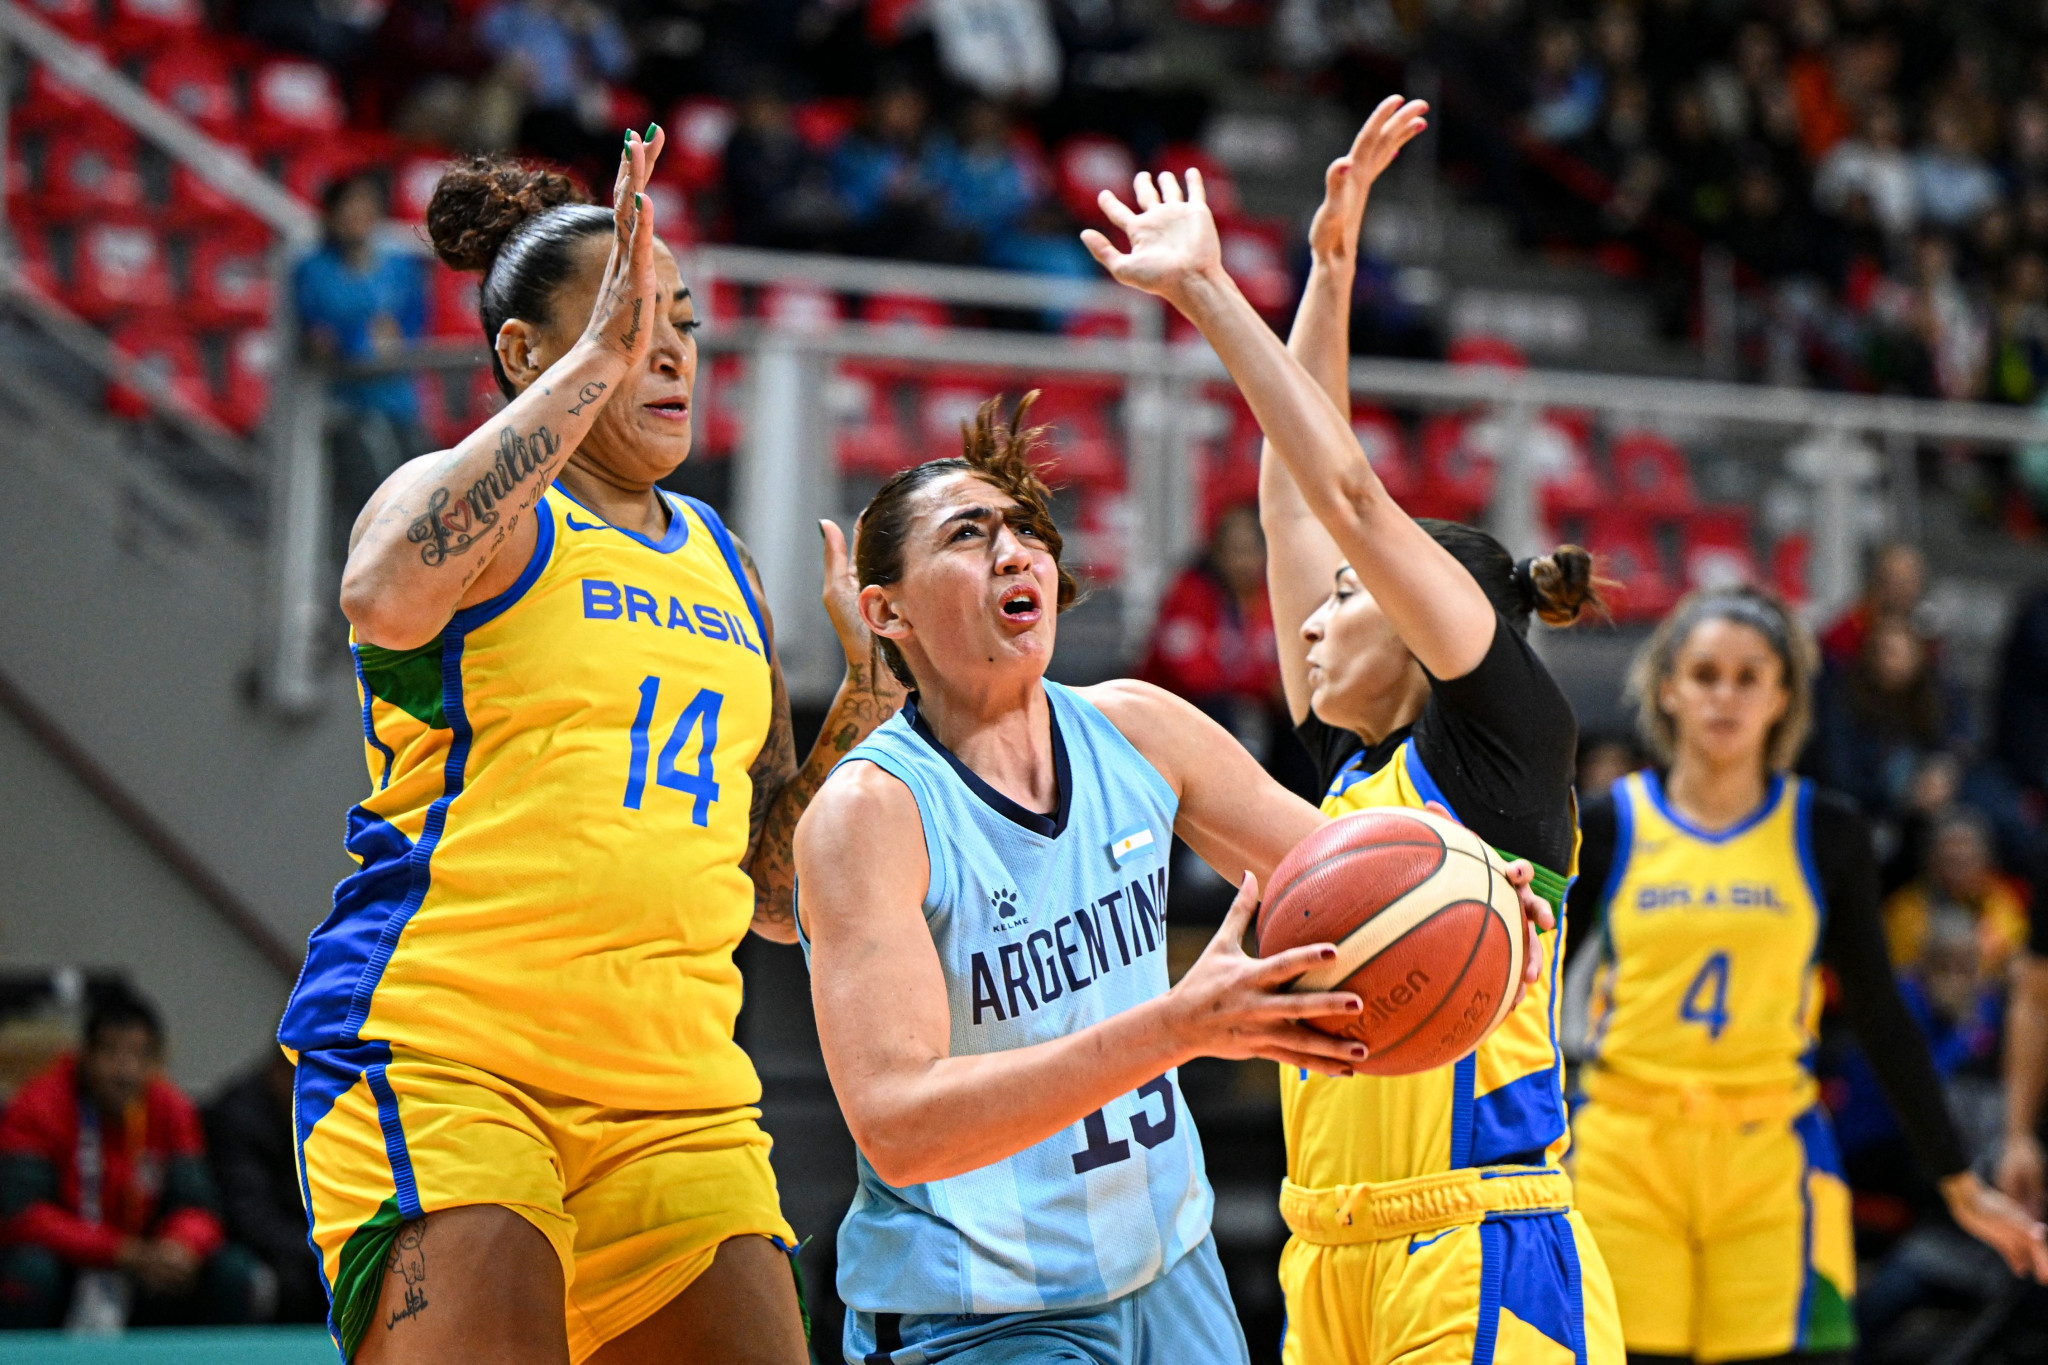 Brazil reached the finals of the women's basketball, defeating Argentina in the semi-finals ©Getty Images